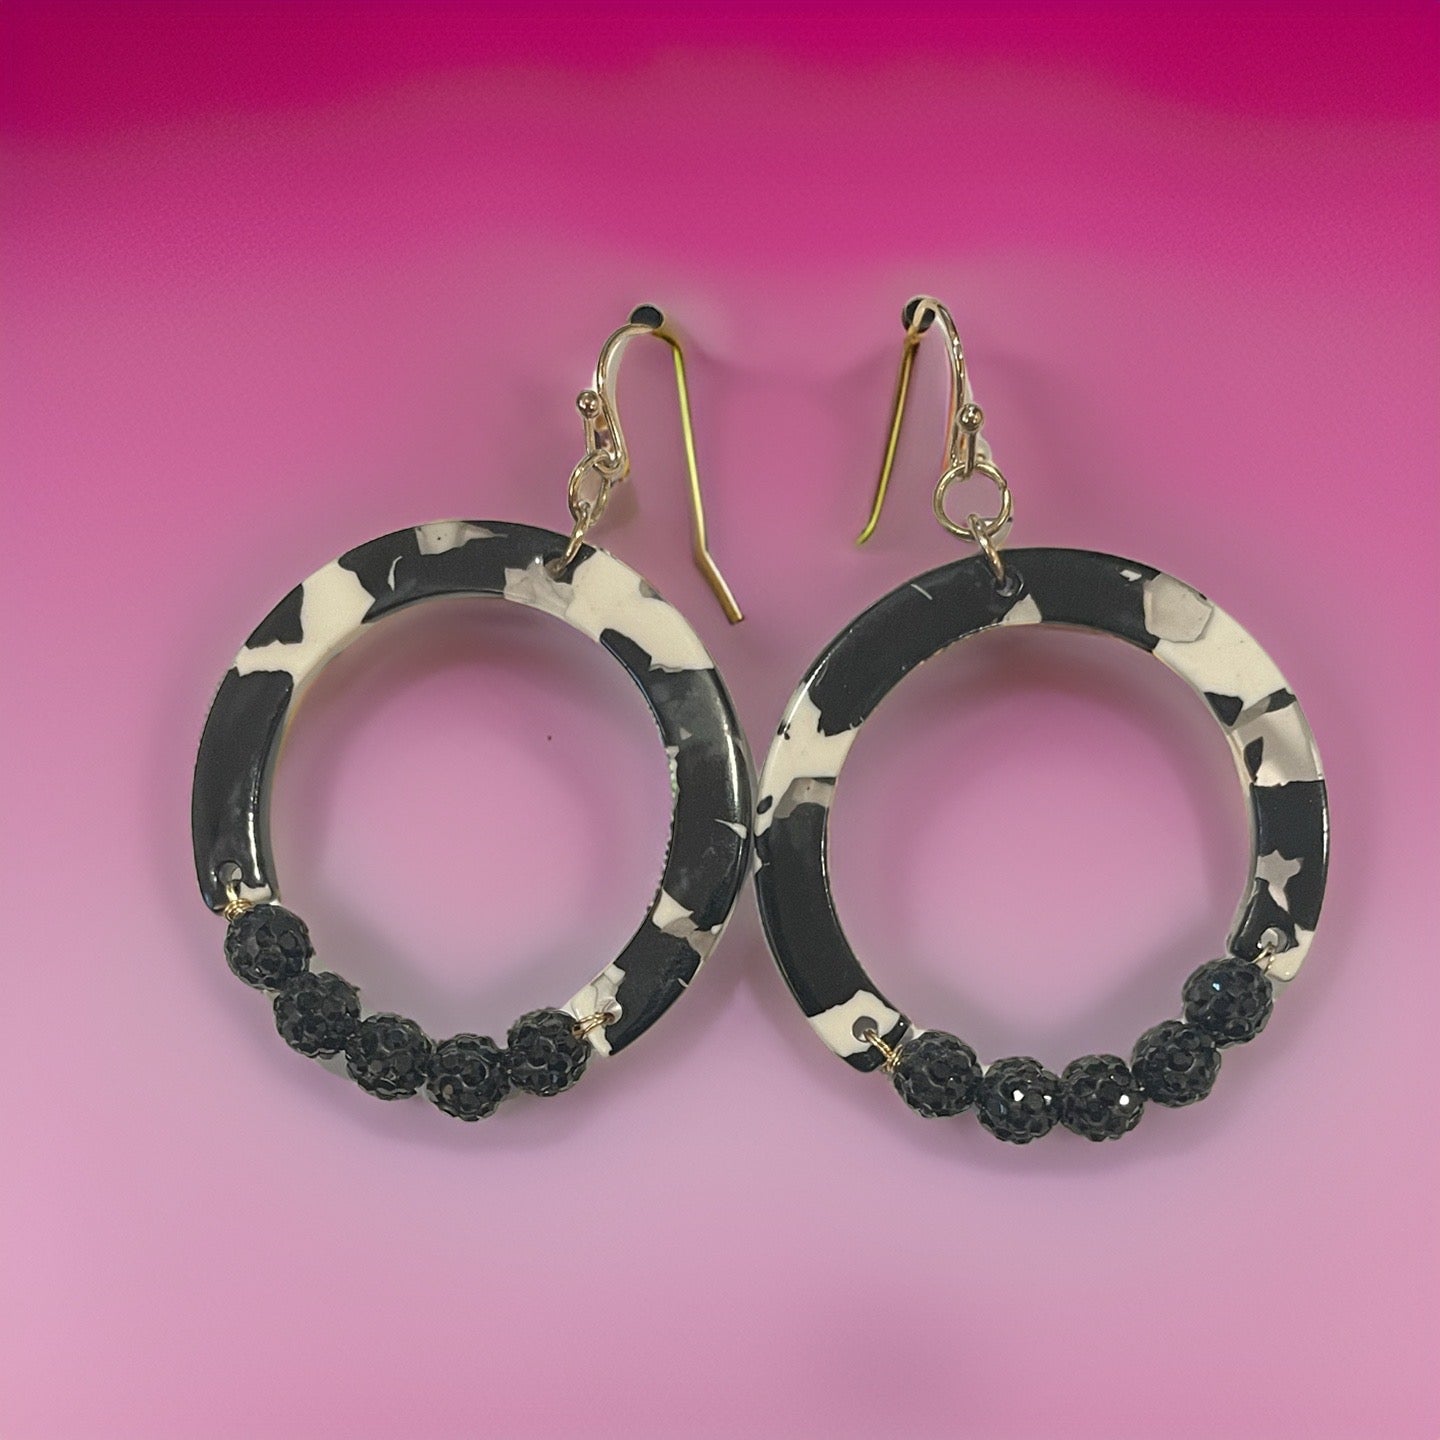 Marble resin open circle drop earrings with rhinestone studded beaded. Available in 4 colors